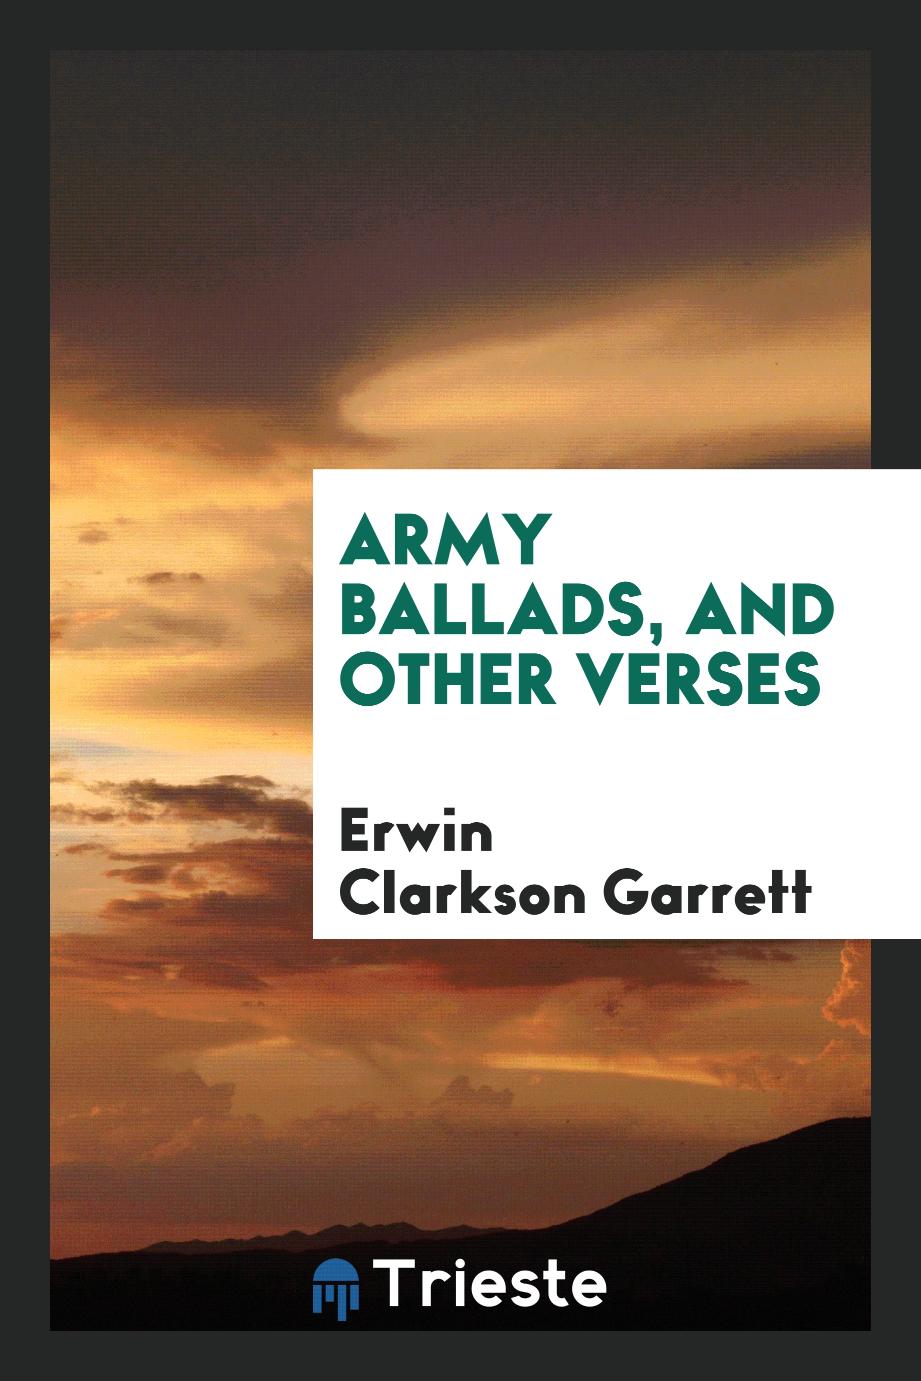 Army ballads, and other verses